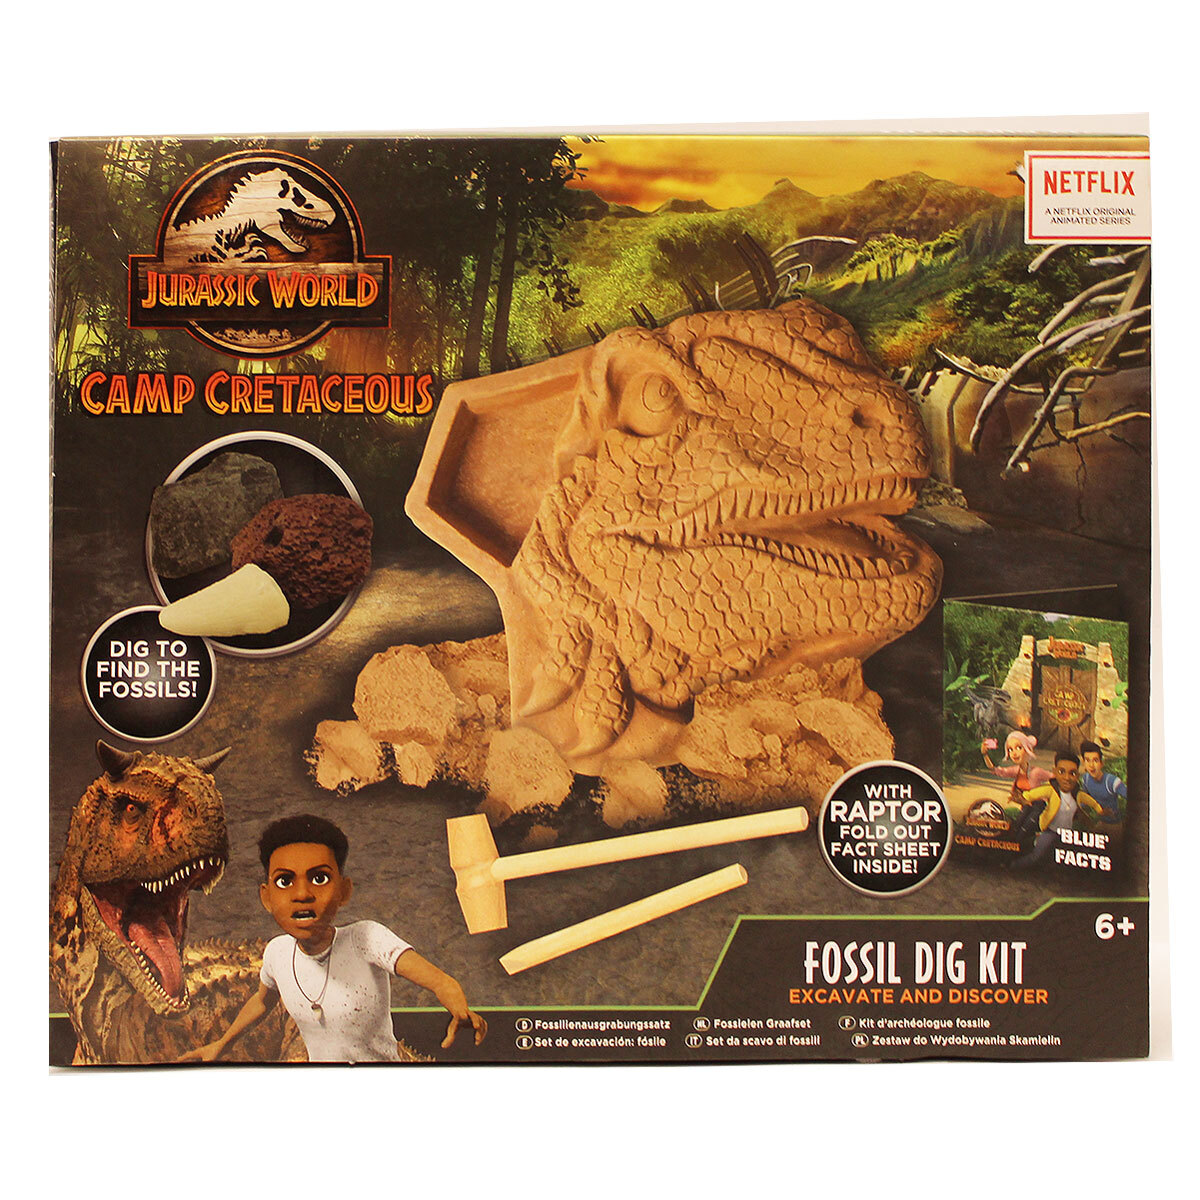 Jurassic World Camp Cretaceous Fossil Dig Kit | The Entertainer